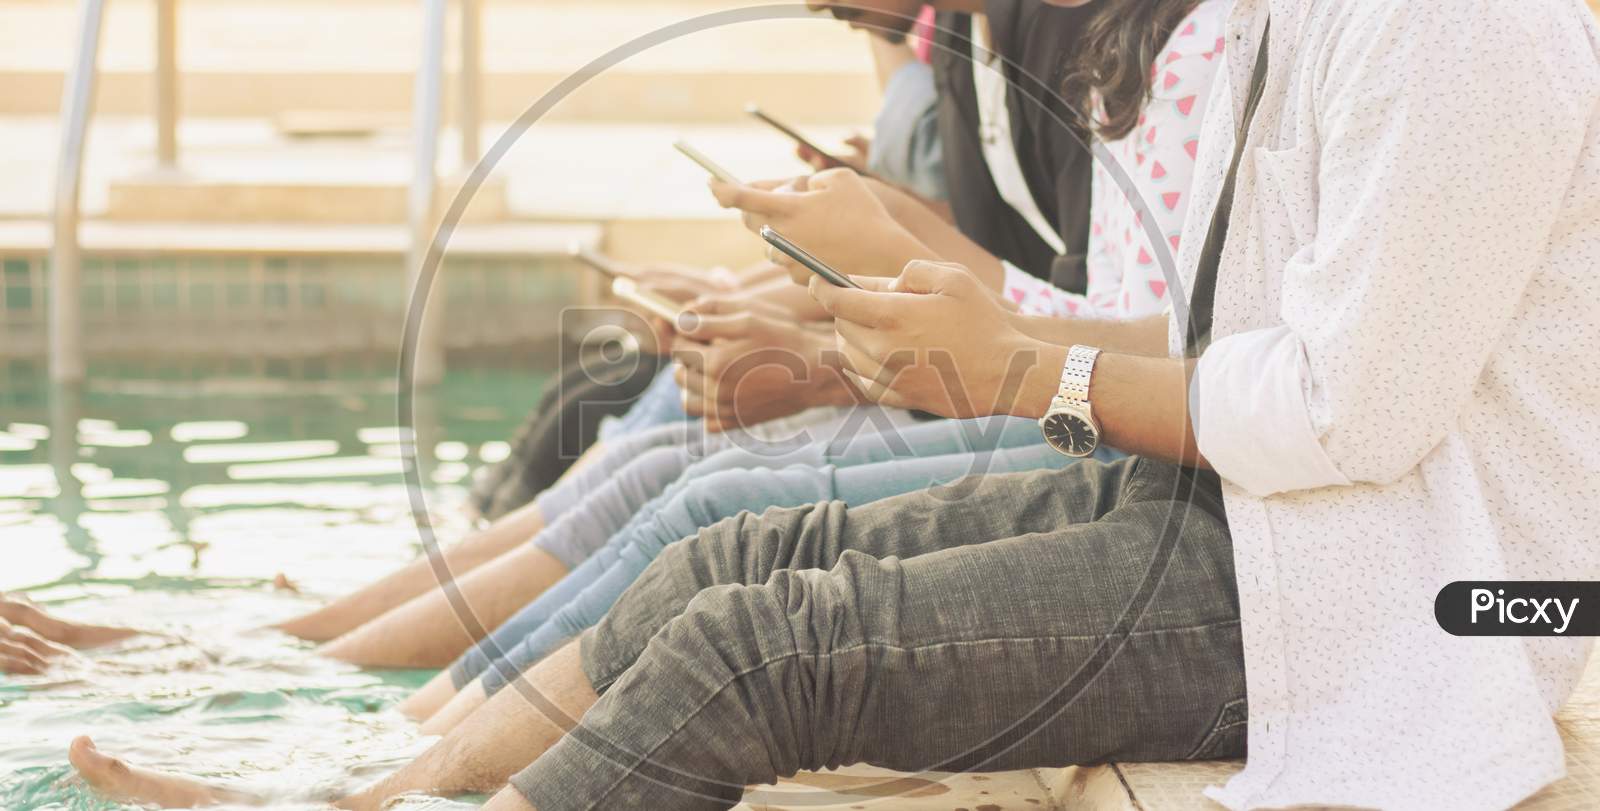 A Group of Young People using Mobile phones or Smartphone At Outdoors in a Pool